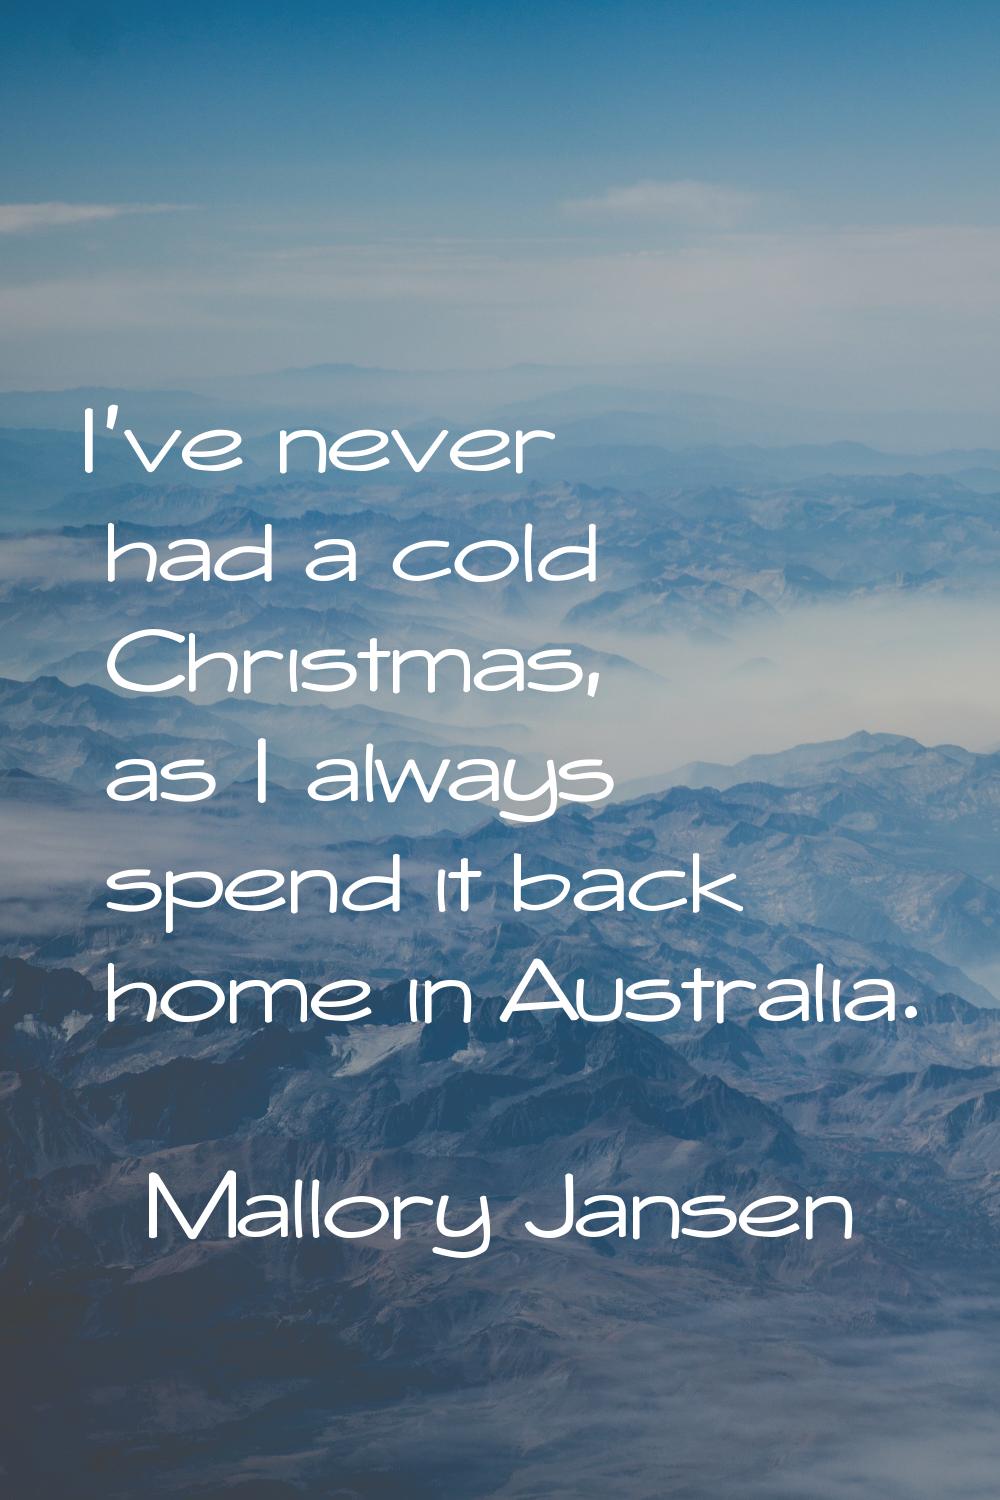 I've never had a cold Christmas, as I always spend it back home in Australia.